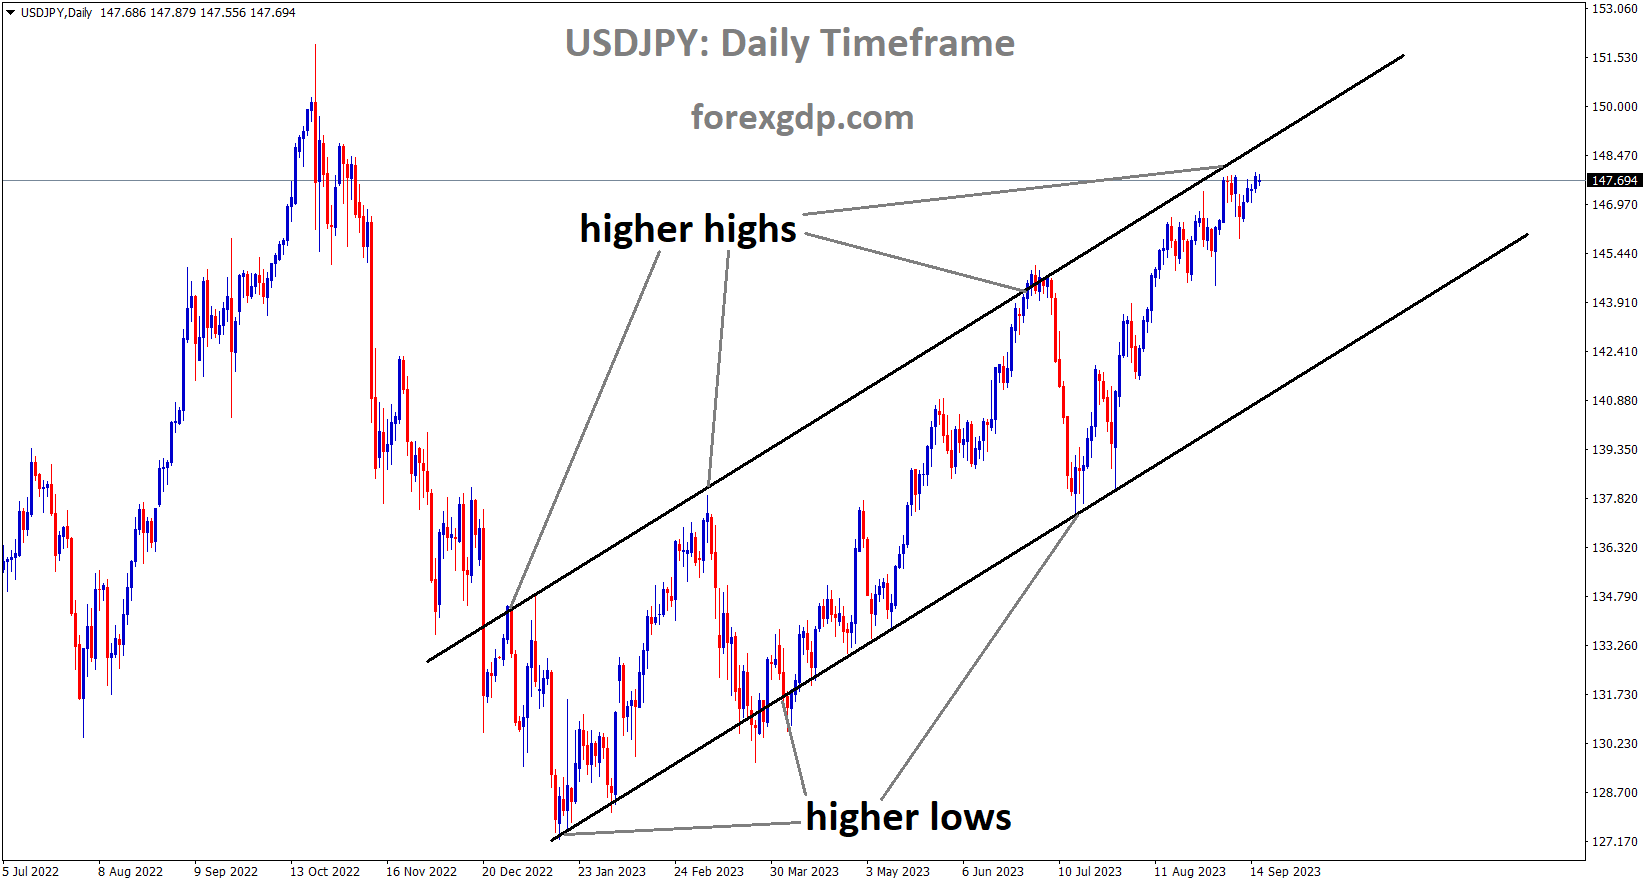 USDJPY is moving in an Ascending channel and the market has reached the higher high area of the channel